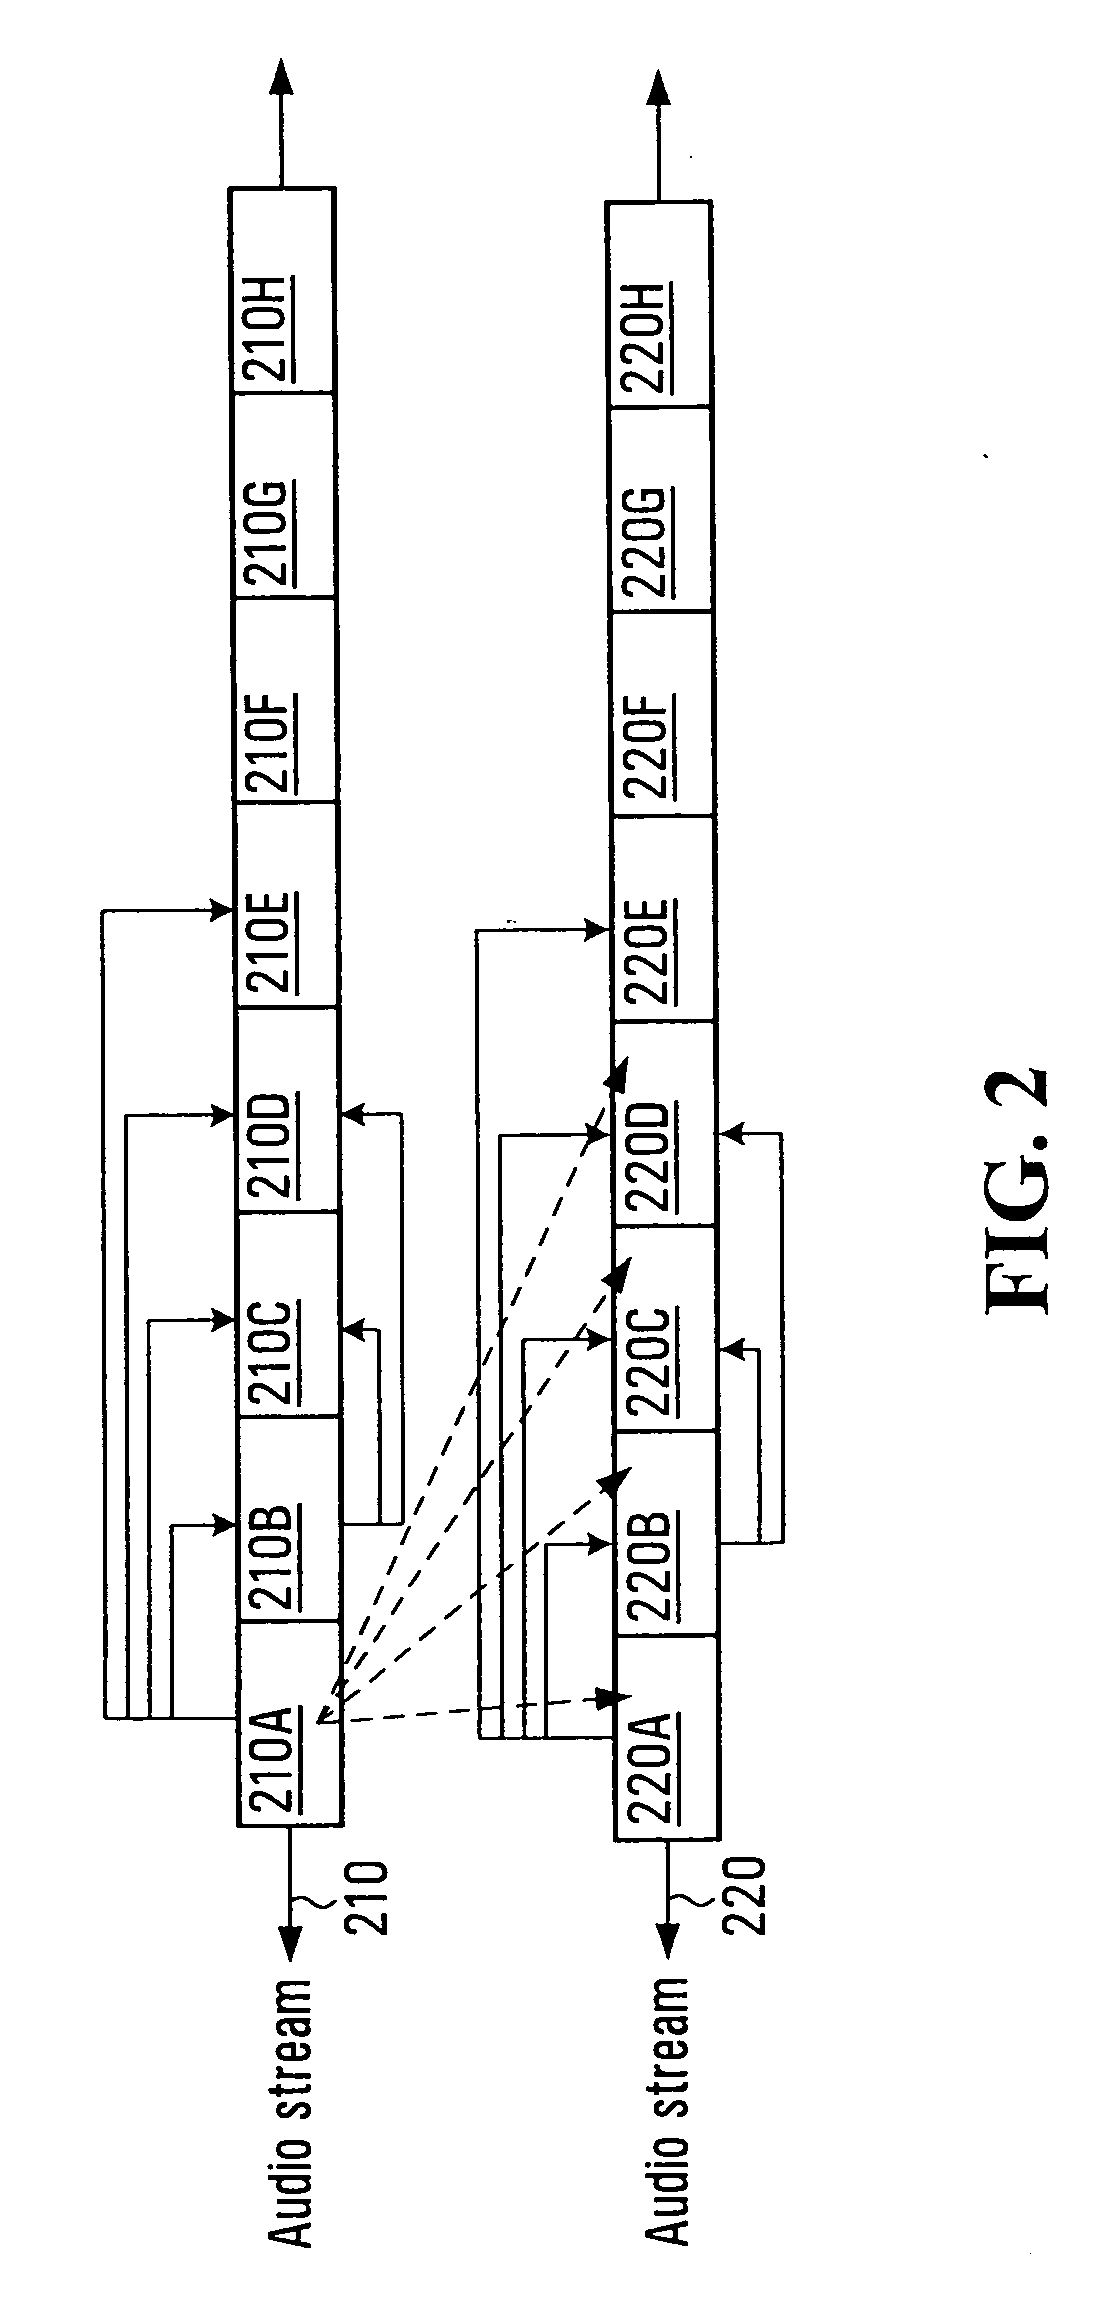 Media detection using acoustic recognition